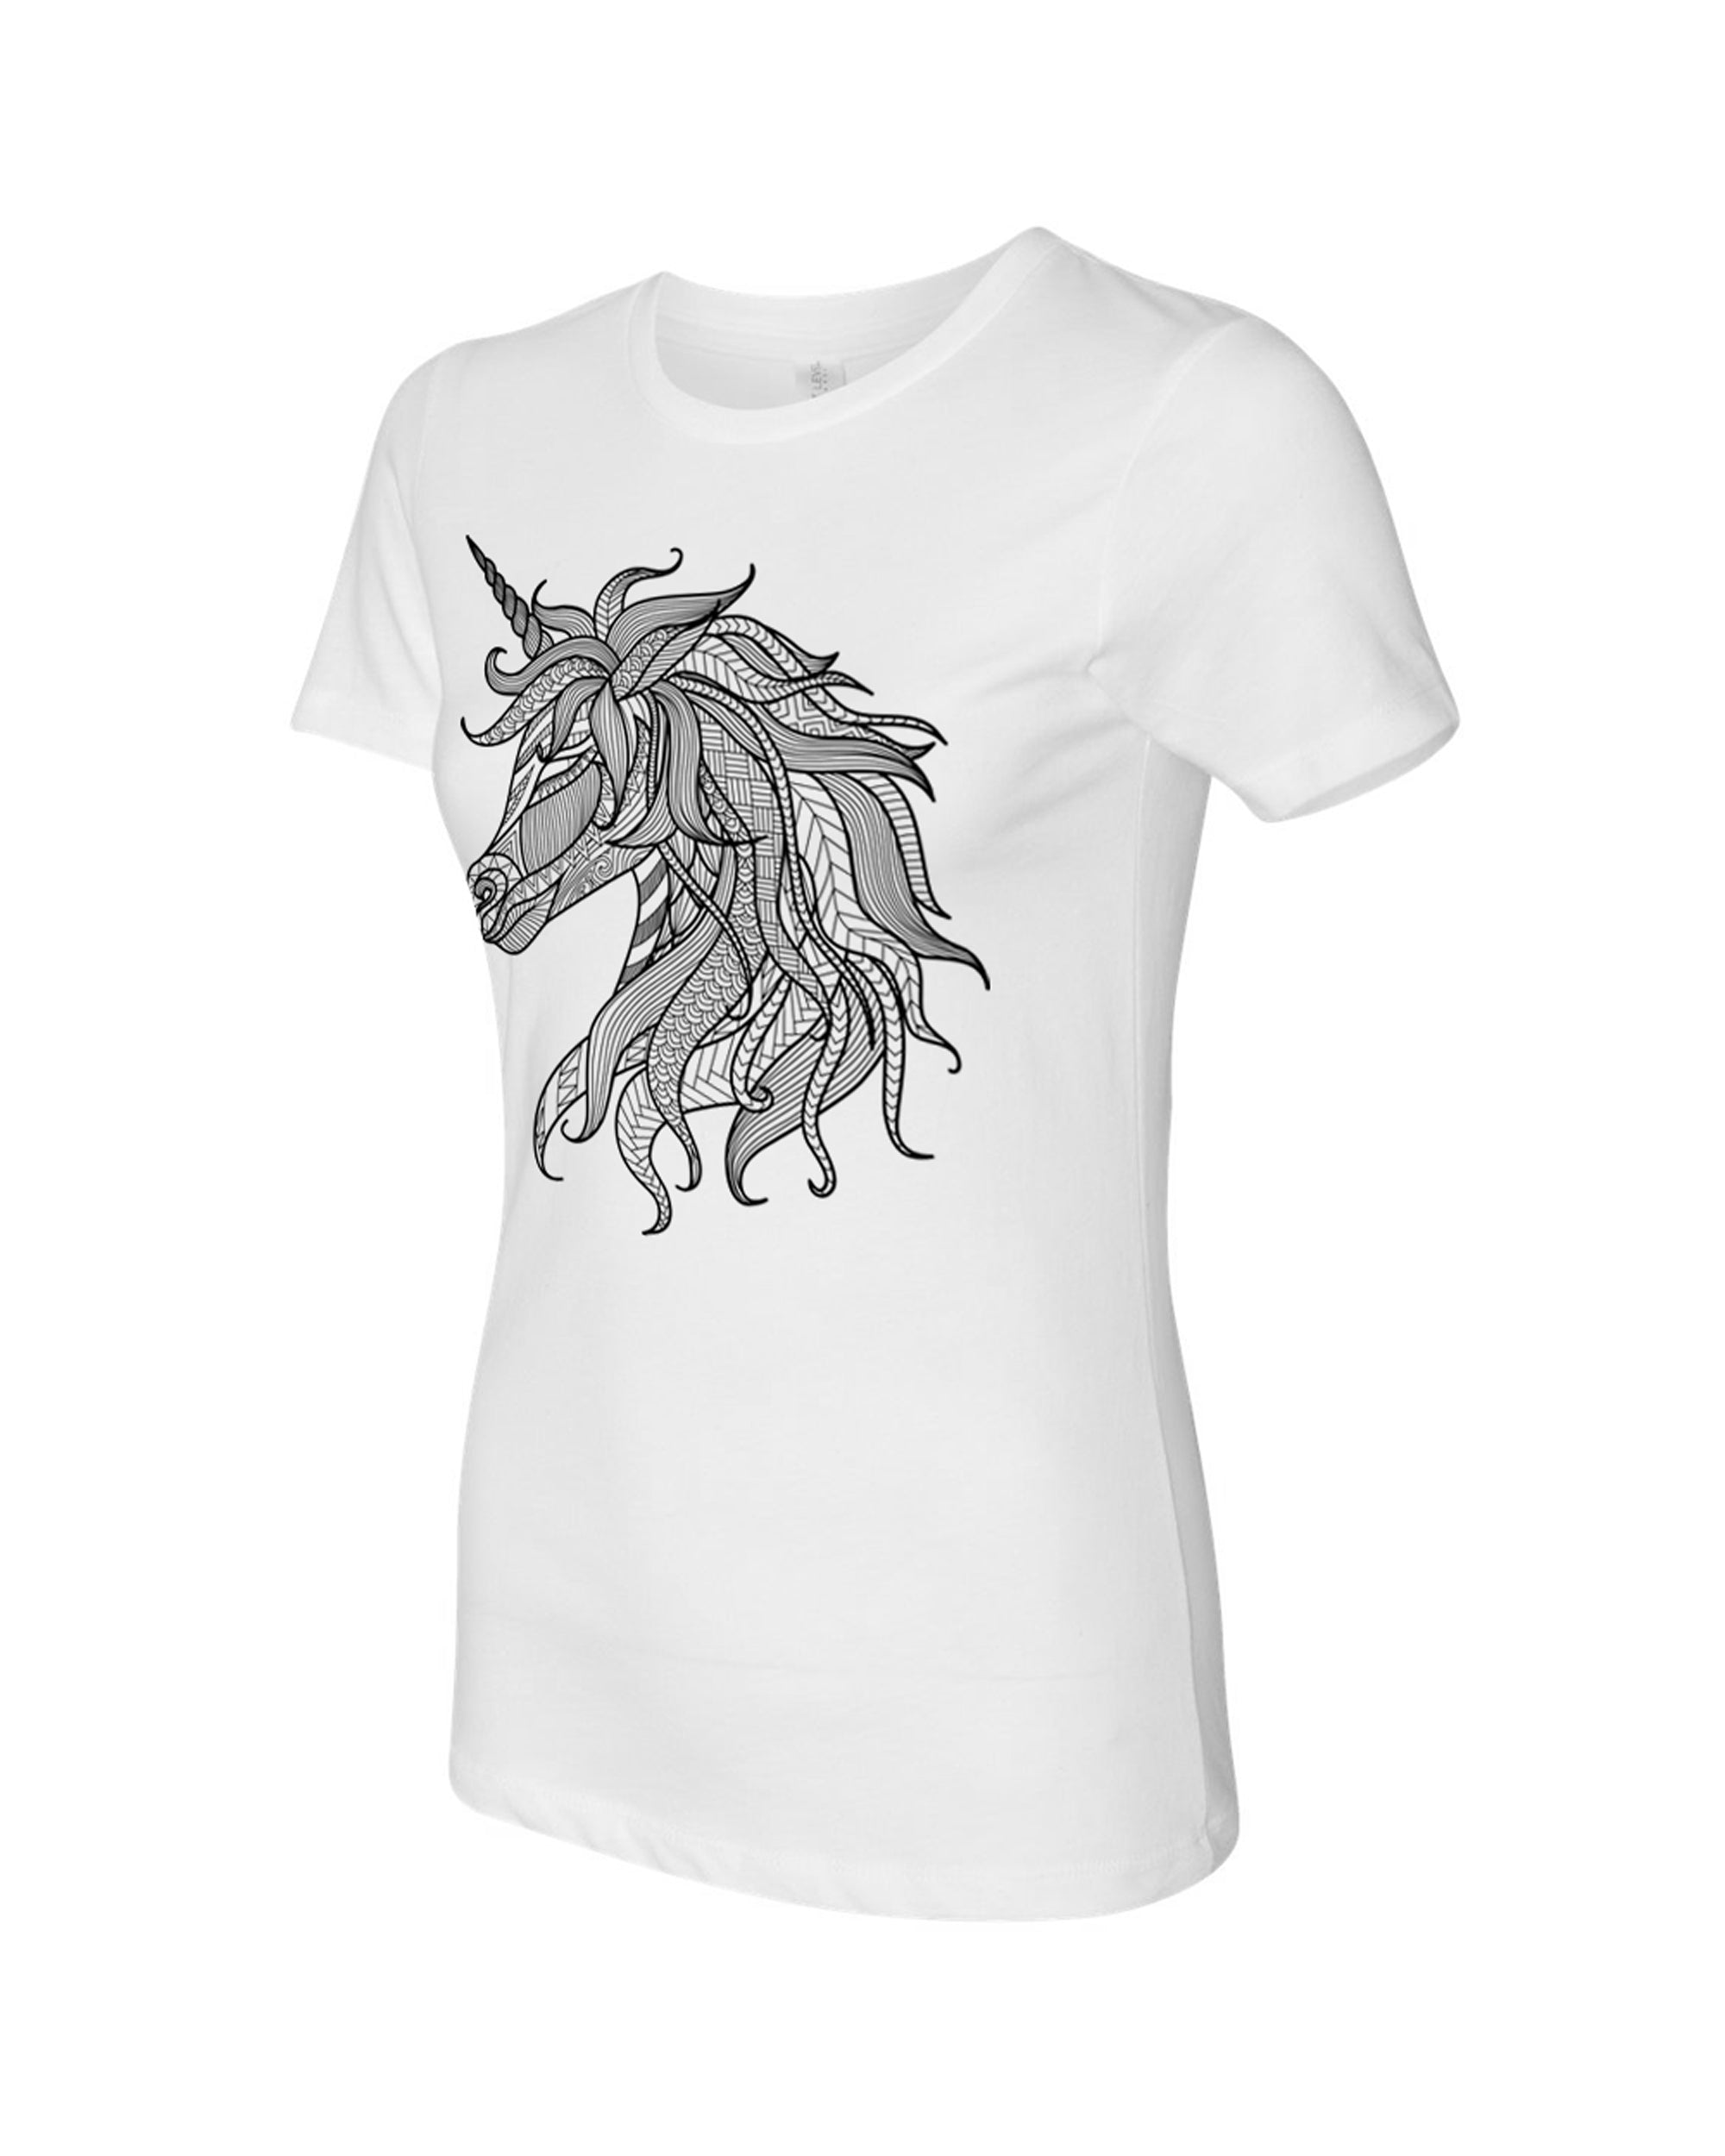 Women's Coloring Unicorn White T Shirt - Adorned By You